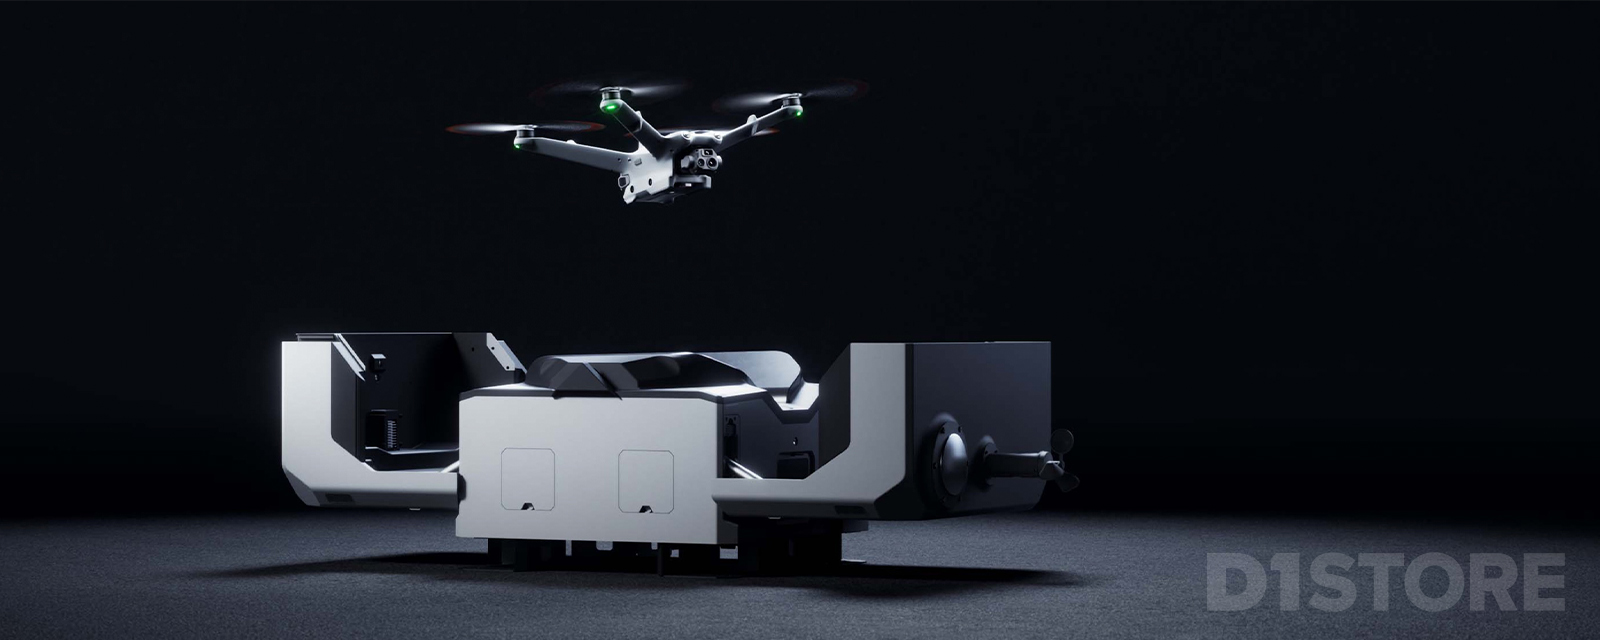 Matrice 3D Drone with DJI Dock 2